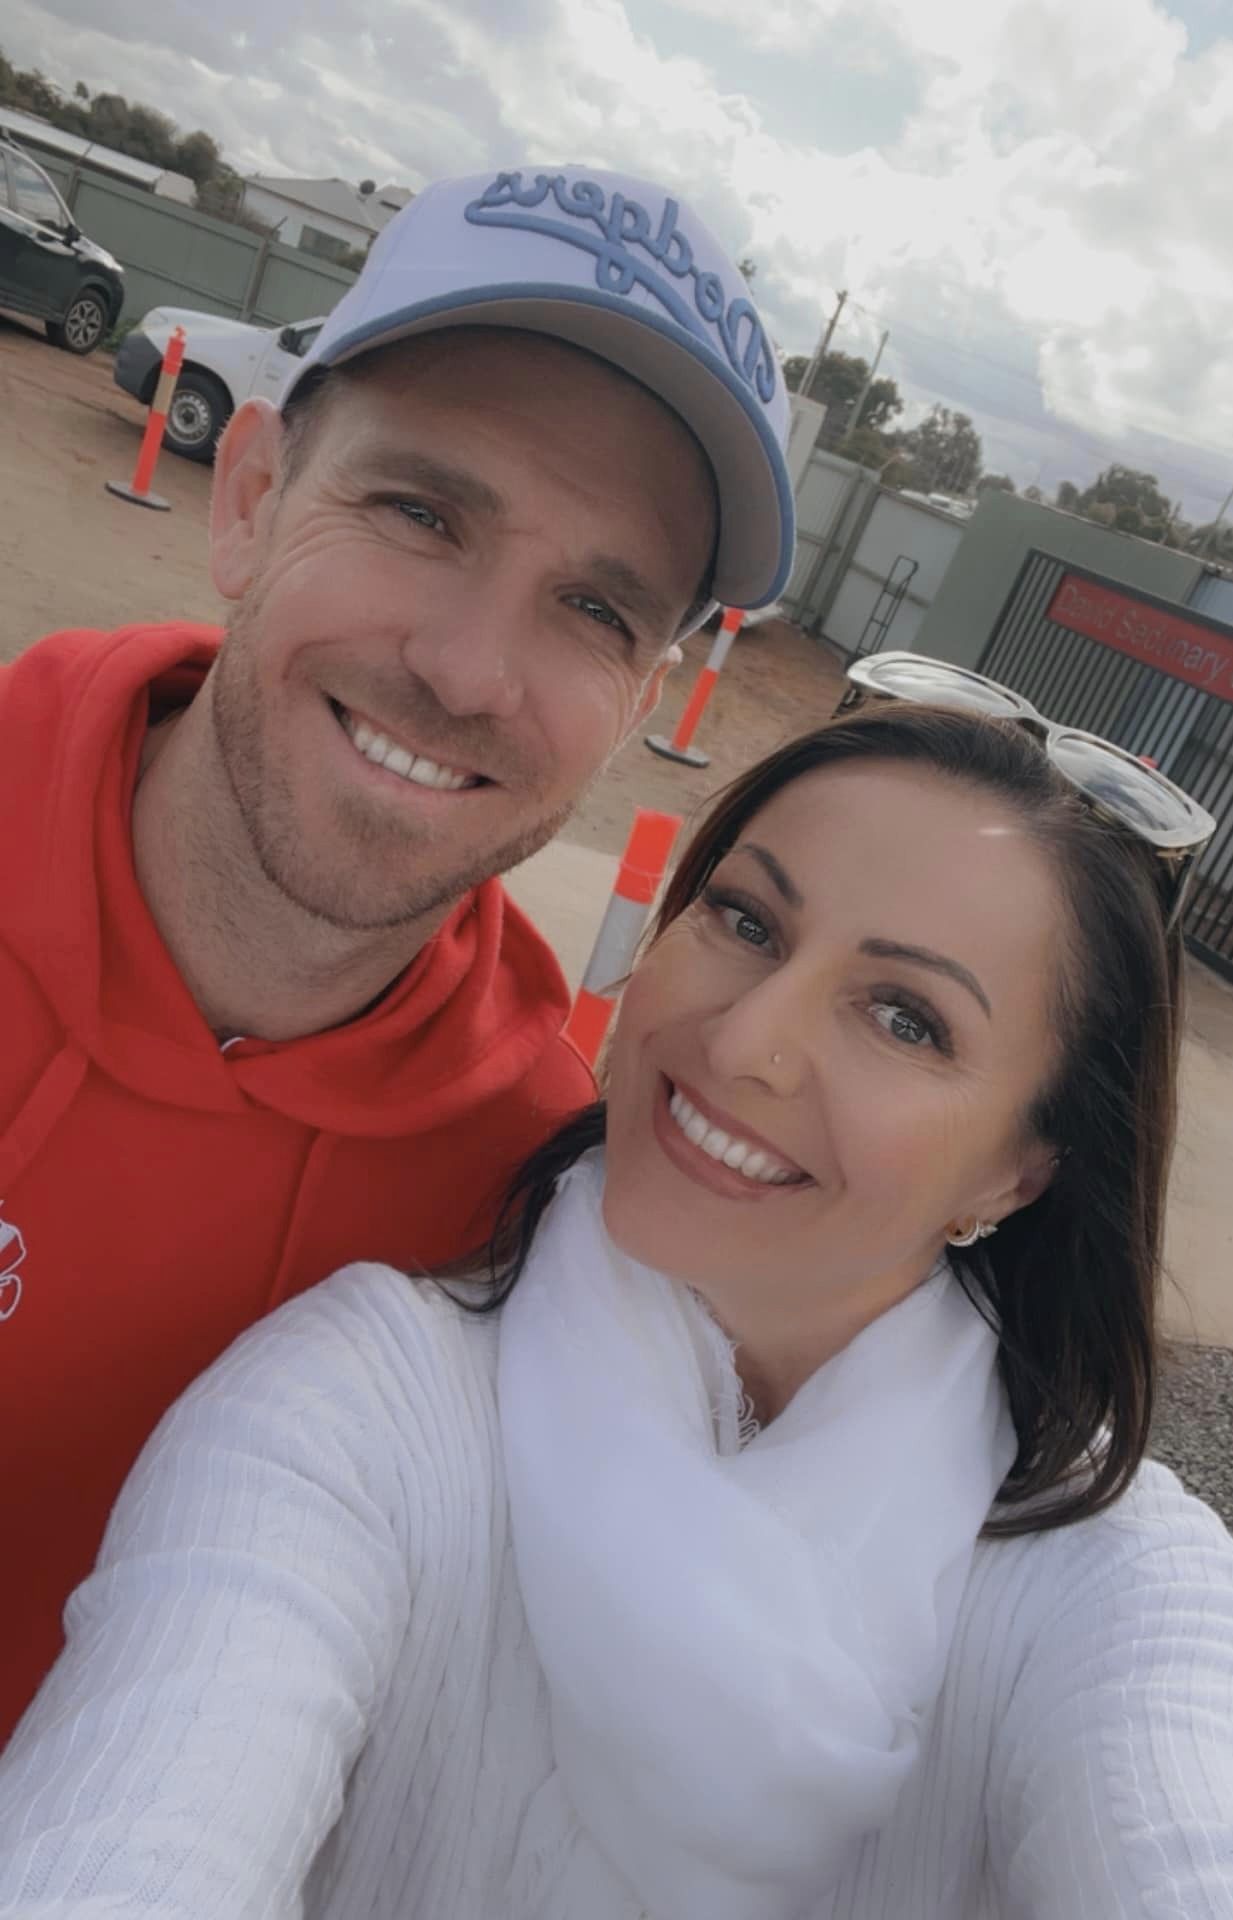 A man wearing a red jumper and a woman wearing sunglasses smiling in a selfie in front of a canteen